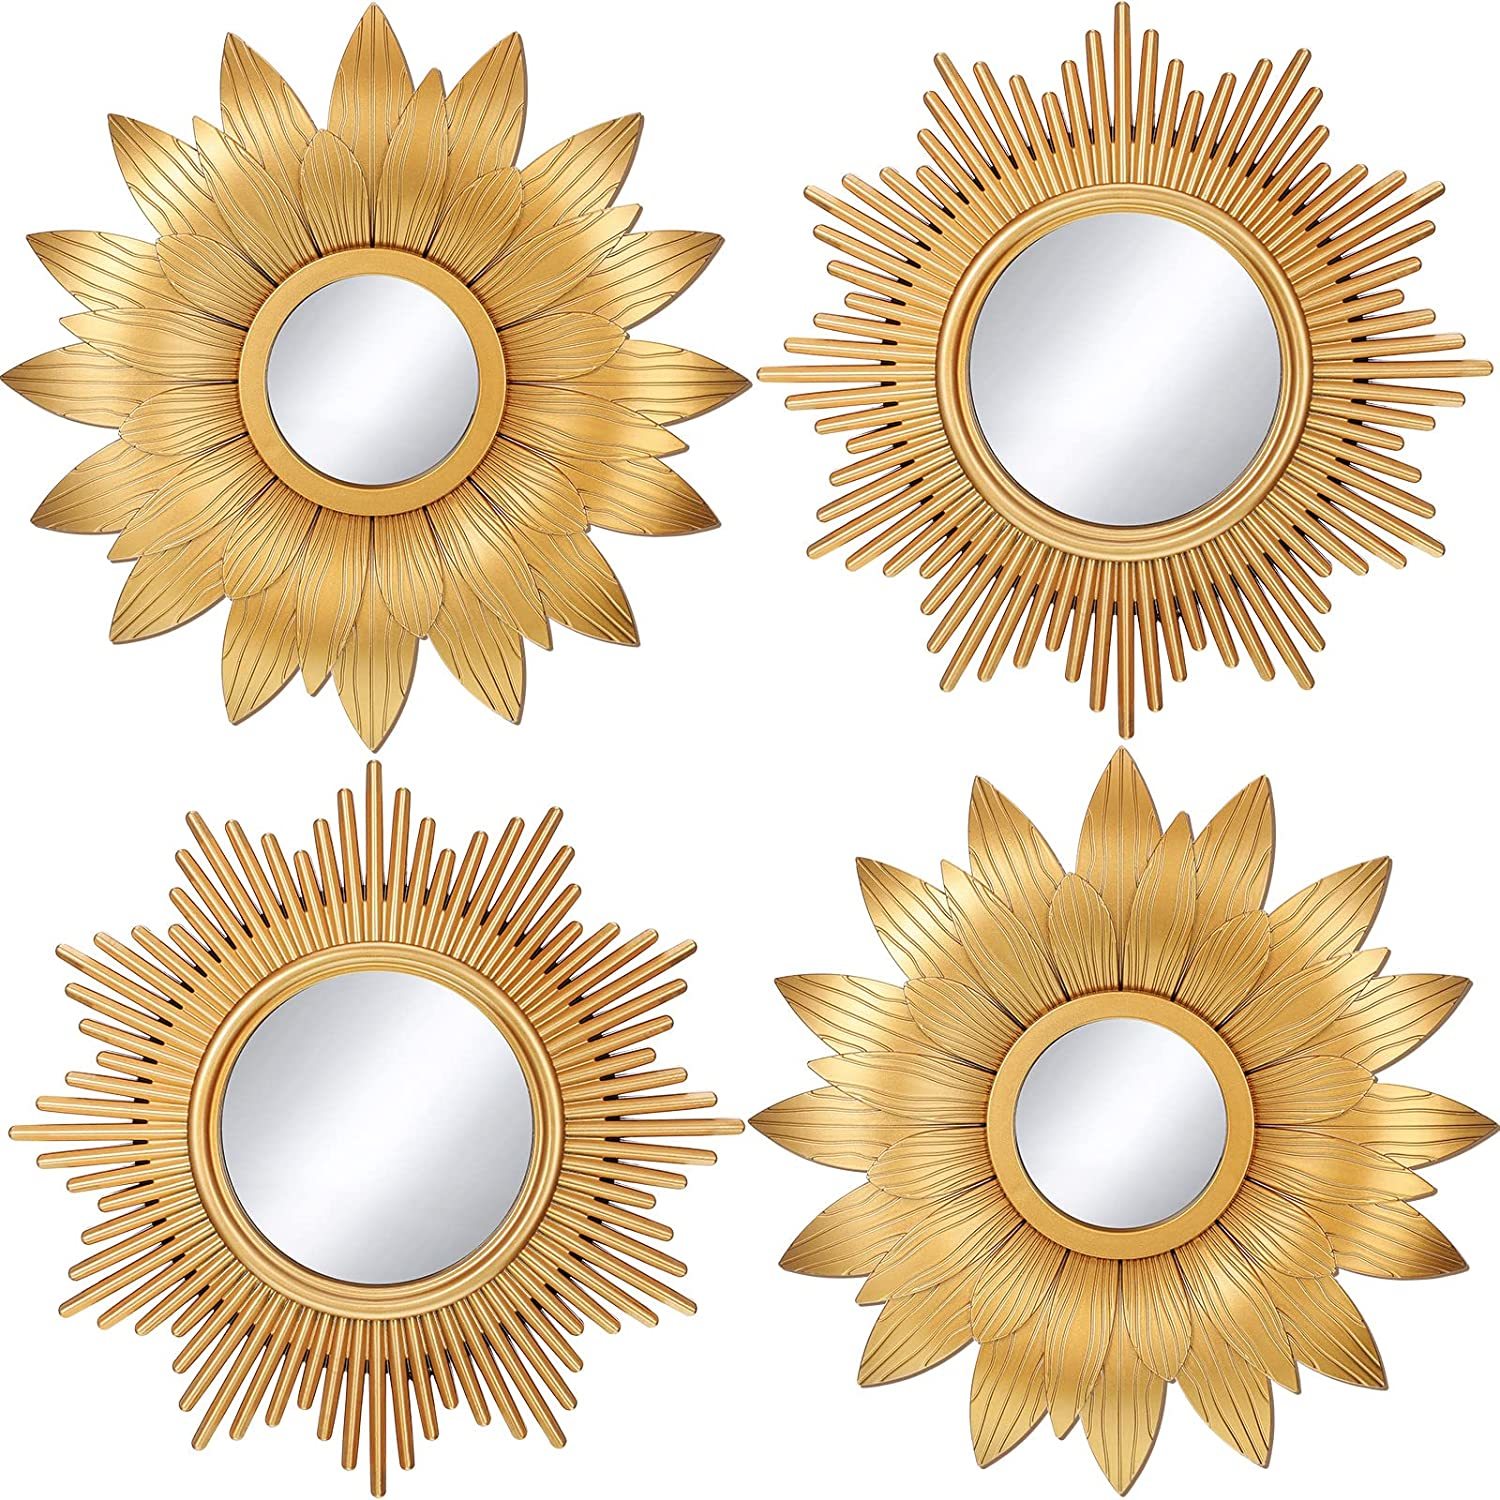 Primary image for 4 Pieces Big Sunburst Wall Mirror Gold Vintage Mirror Set For Home Decor Metal